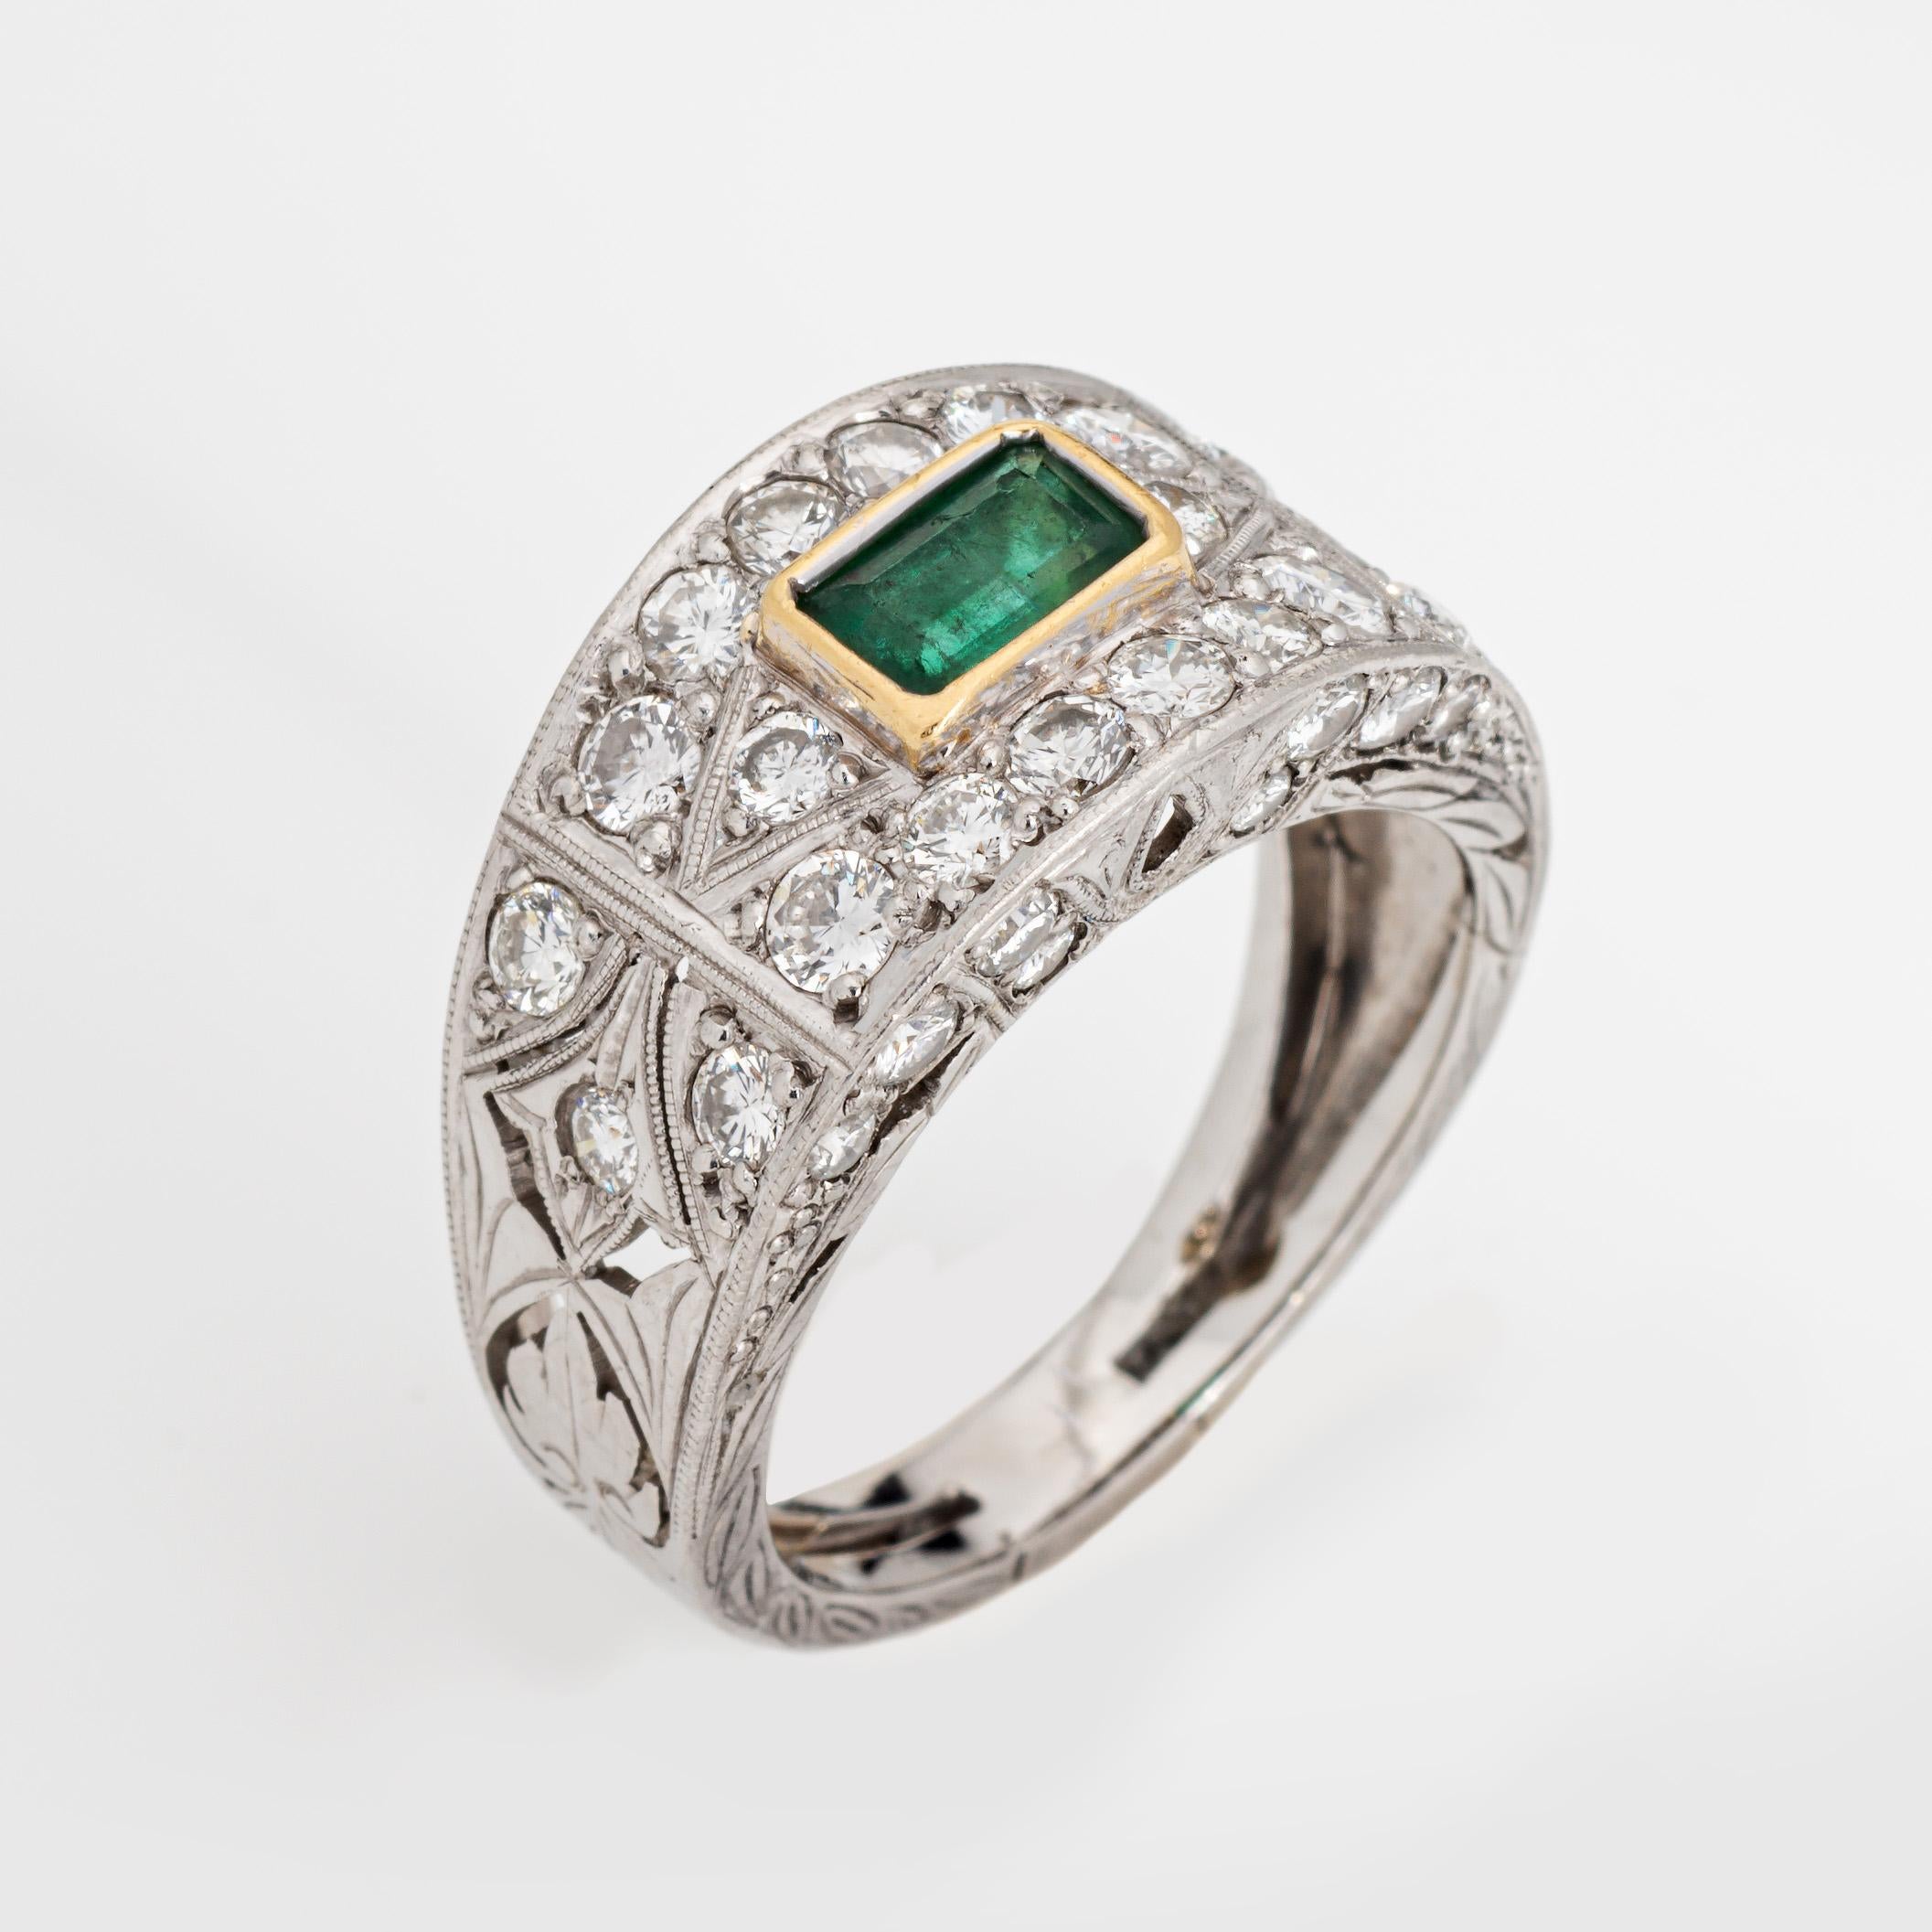 Stylish and finely detailed emerald & diamond ring crafted in 900 platinum.

Center set emerald measures 5.5mm x 4mm. Diamonds total an estimated 0.75 carats (estimated at H-I color and VS2-SI2 clarity). Note: few chips to the emerald (visible under